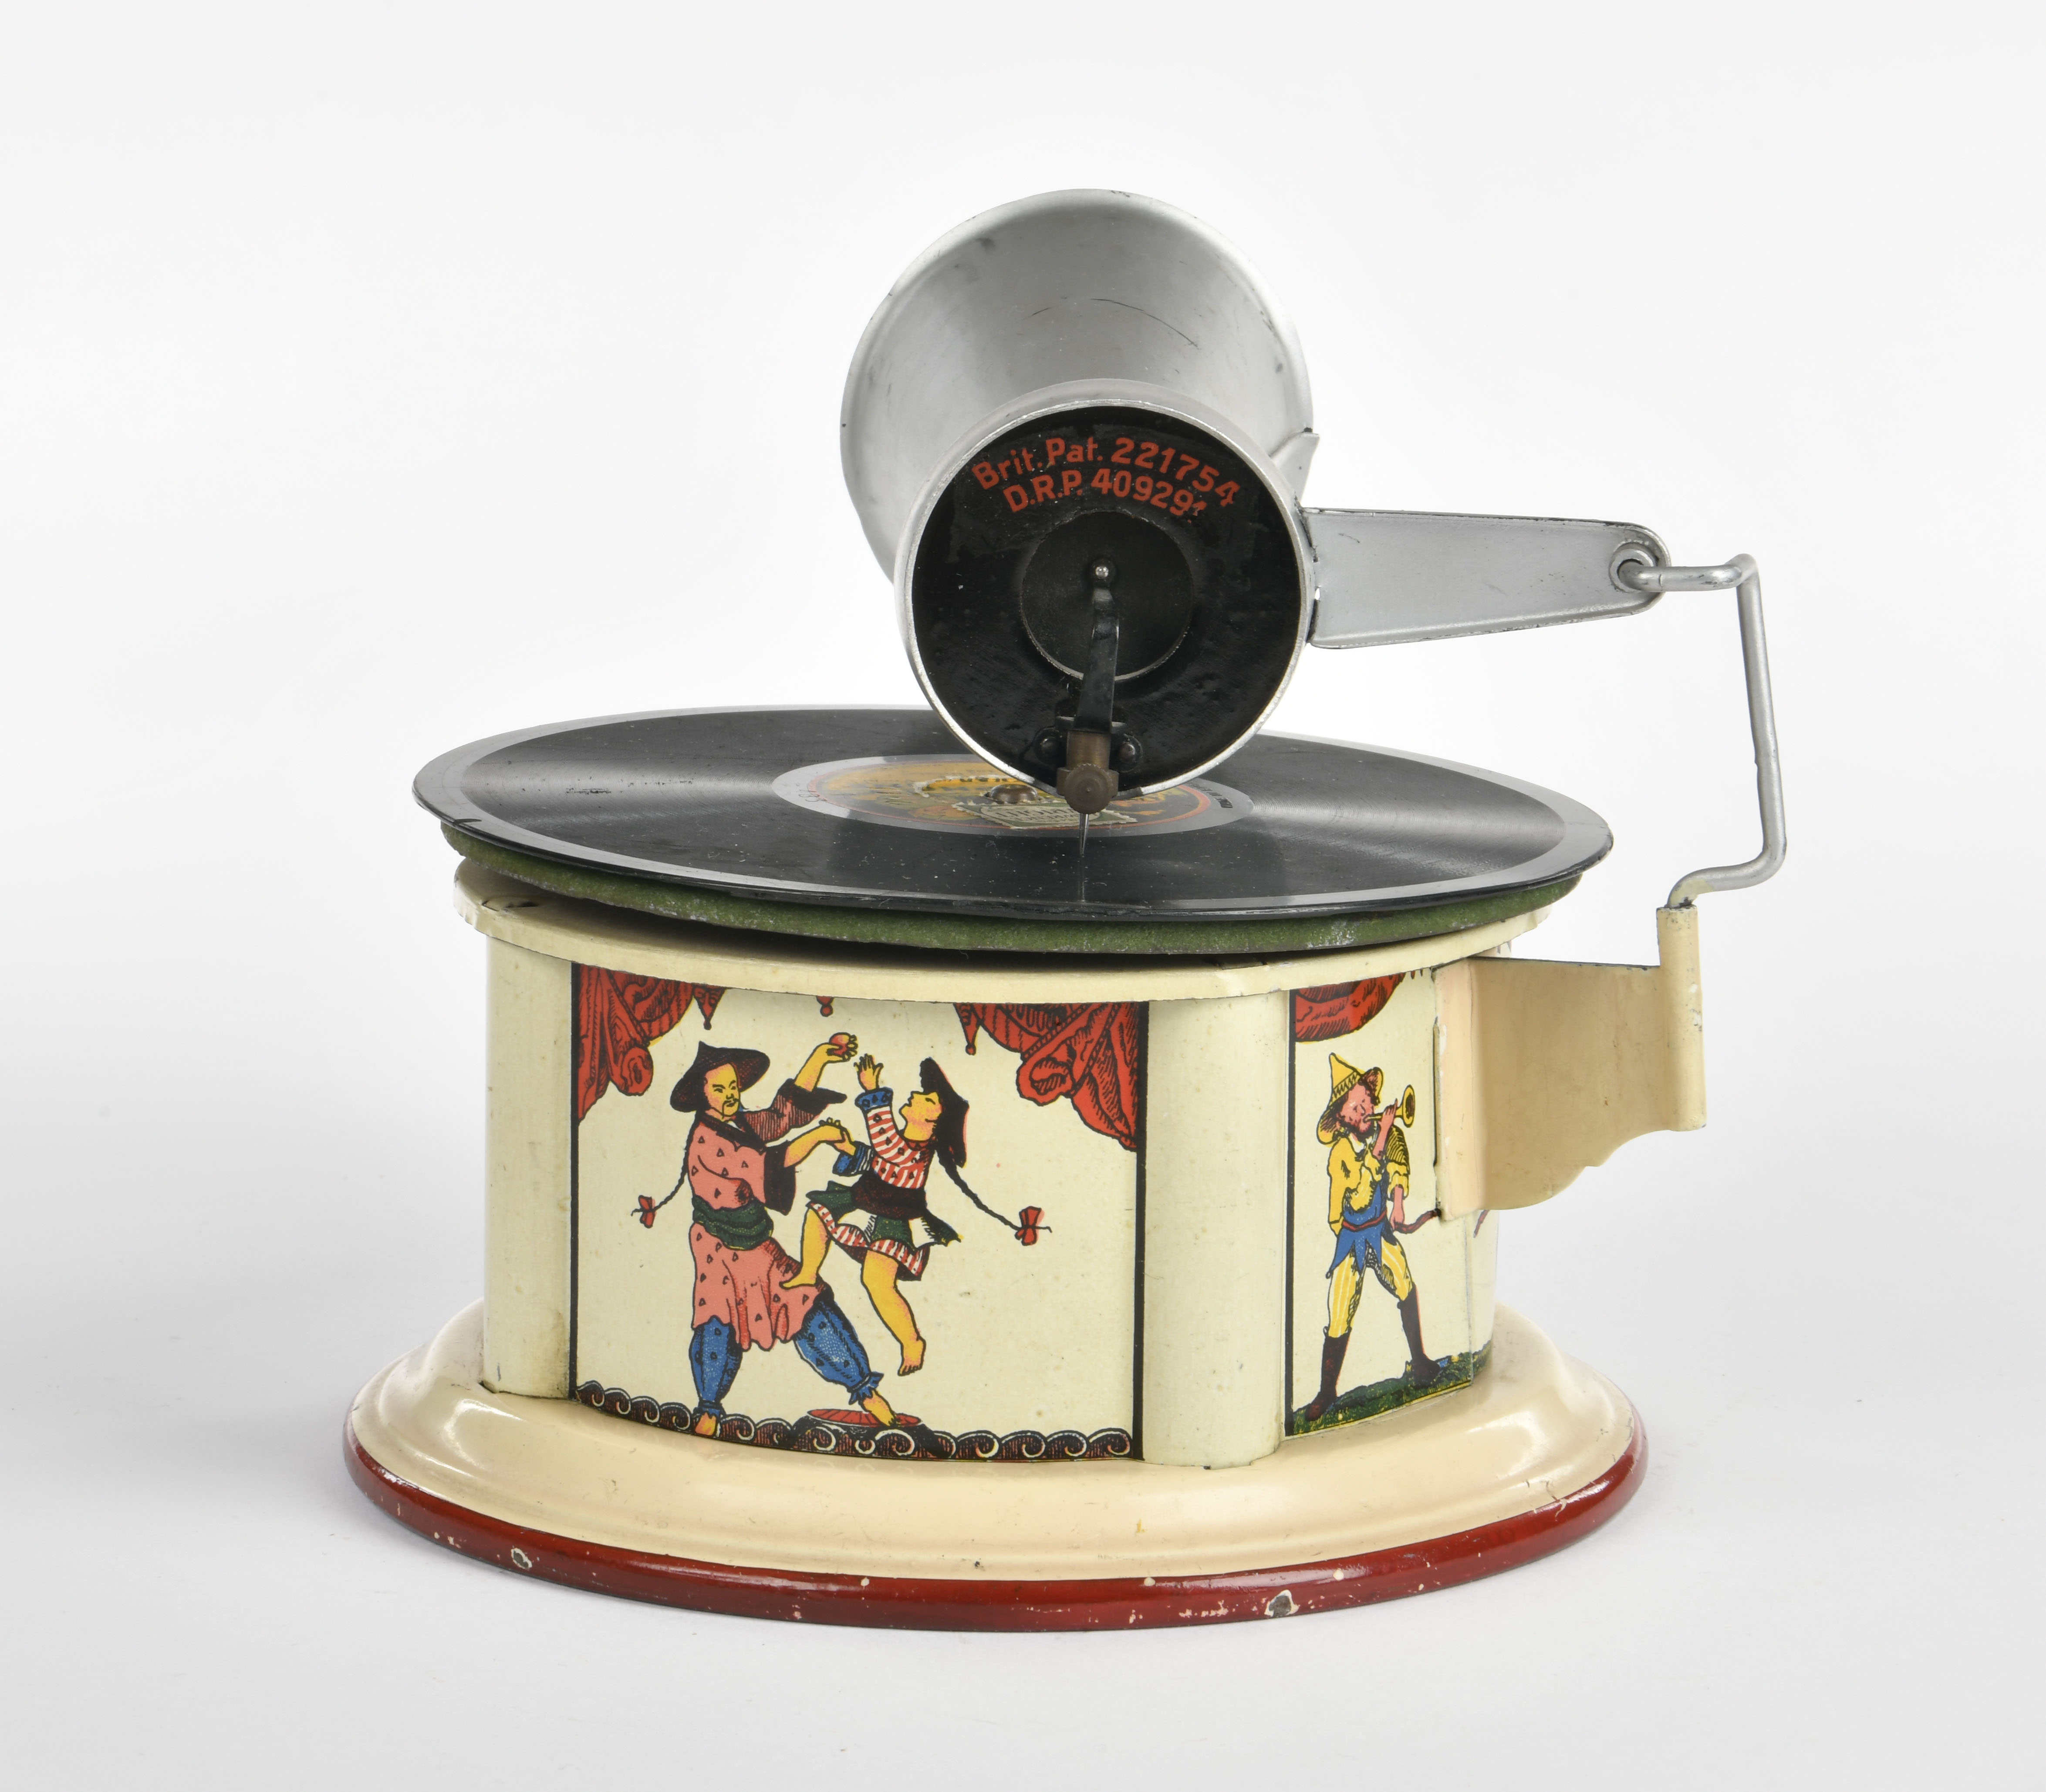 Bing, children gramophone "Kiddyphone", Germany pw, tin, cw ok, min. paint d., with record, C 1-2 - Image 2 of 2